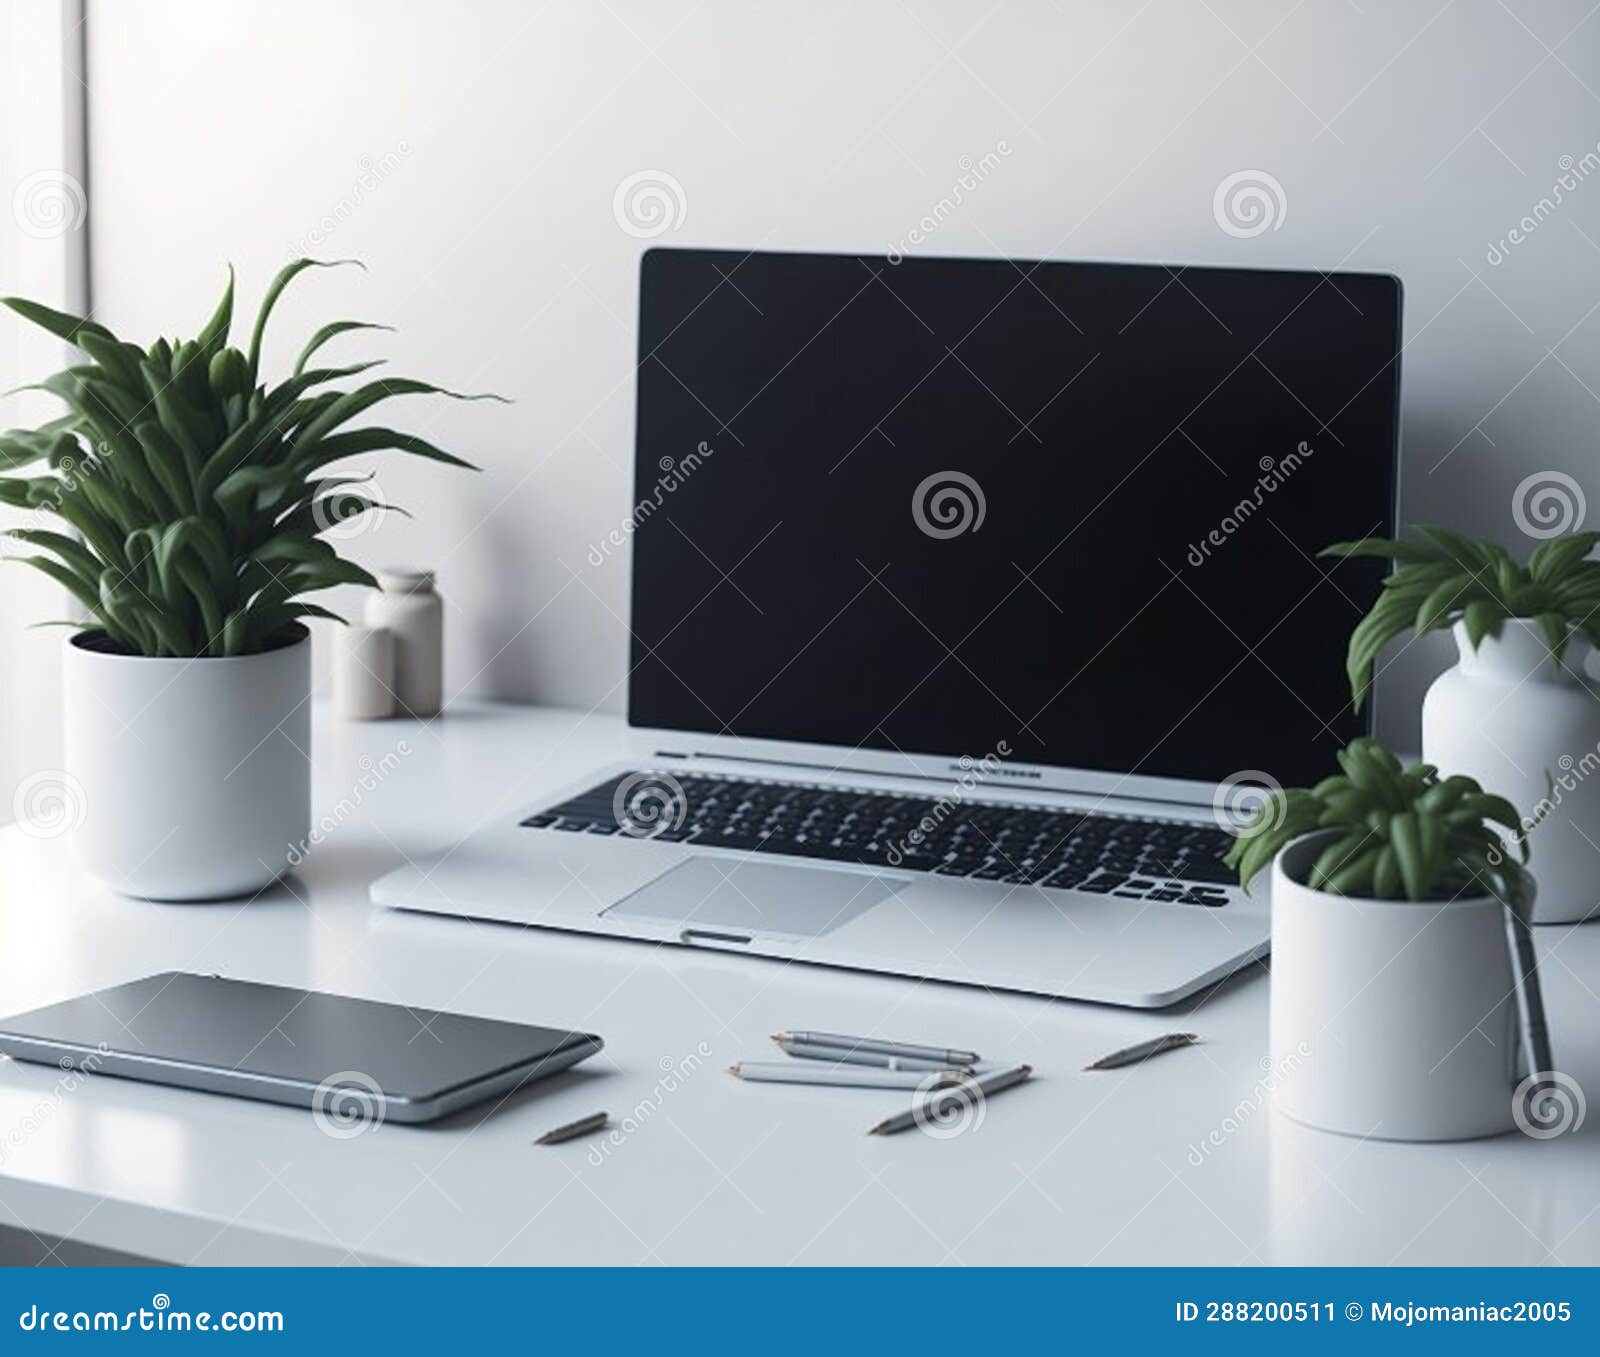 most downloaded laptop mockup - ai-generated images